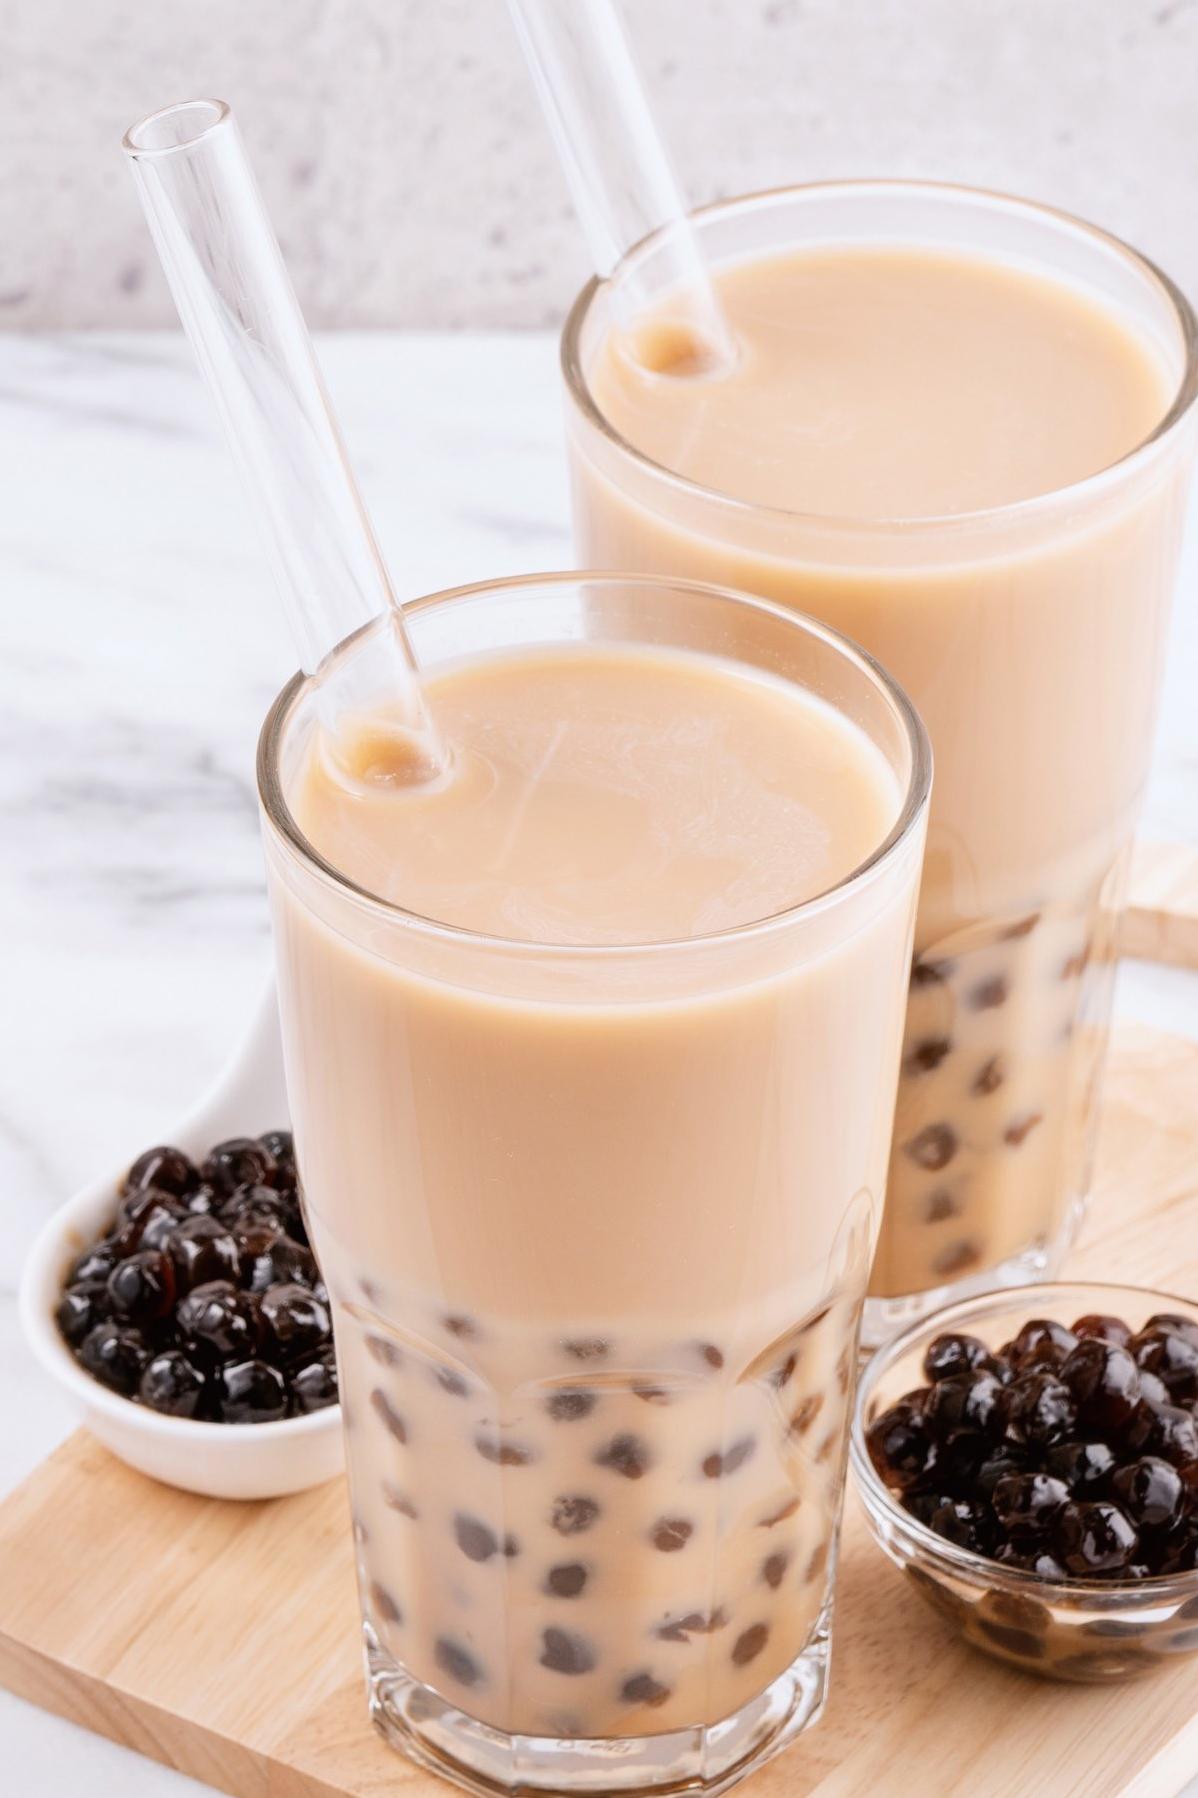  Looking for a new way to spice up your coffee? Try this Hong Kong-style drink.